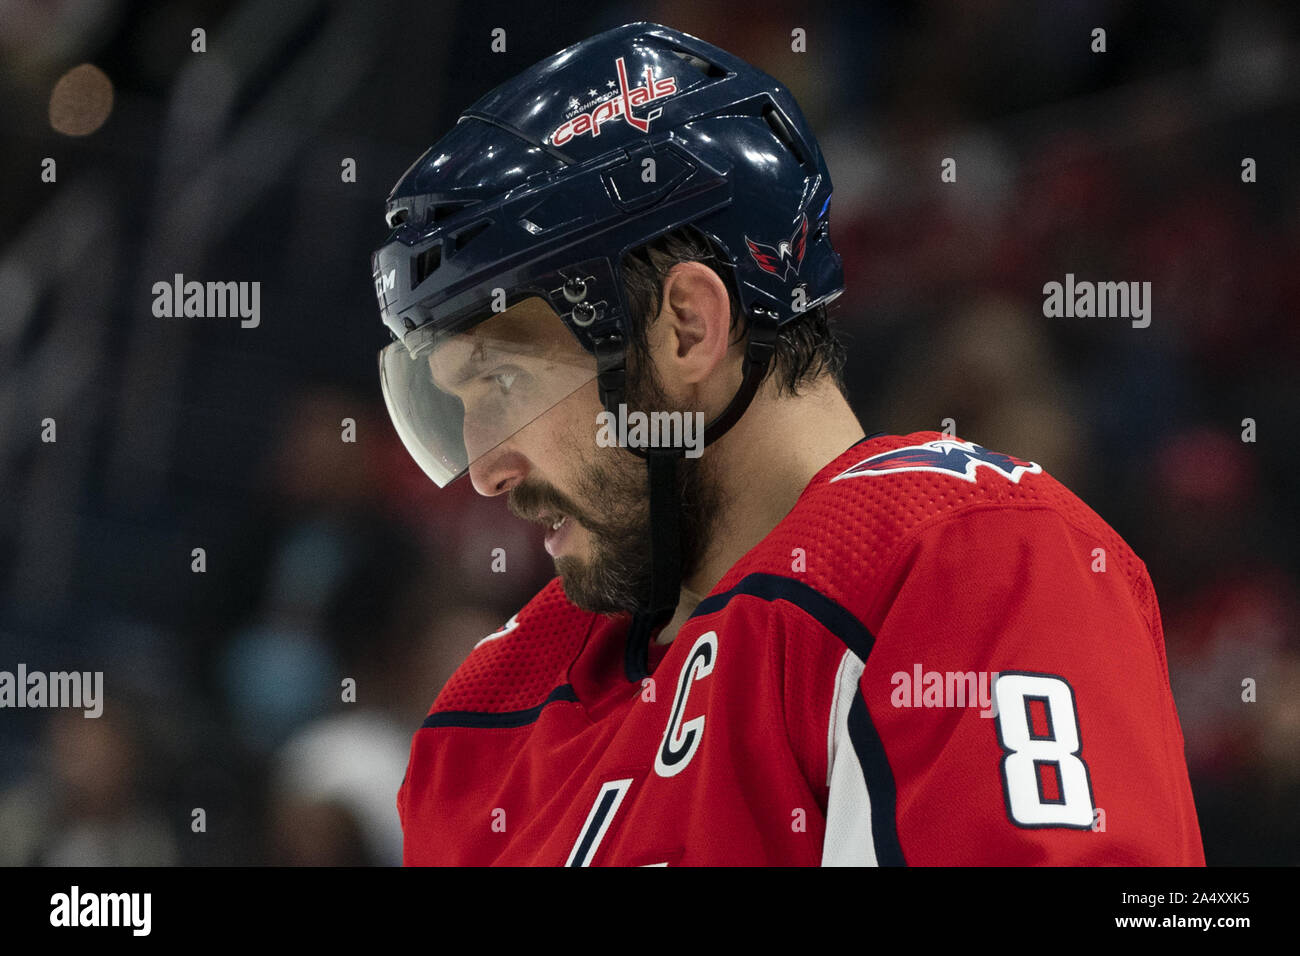 Washington, United States. 16th Oct, 2019. Washington Capitals left wing Alex Ovechkin (8) looks on during a stoppage in play during the third period as the Caps play the Toronto Maple Leafs at Capital One Arena in Washington, DC on Wednesday, October 16, 2019. The Capitals host the Toronto Maple Leafs to start a 3 game home stand tonight. Photo by Alex Edelman/UPI Credit: UPI/Alamy Live News Stock Photo